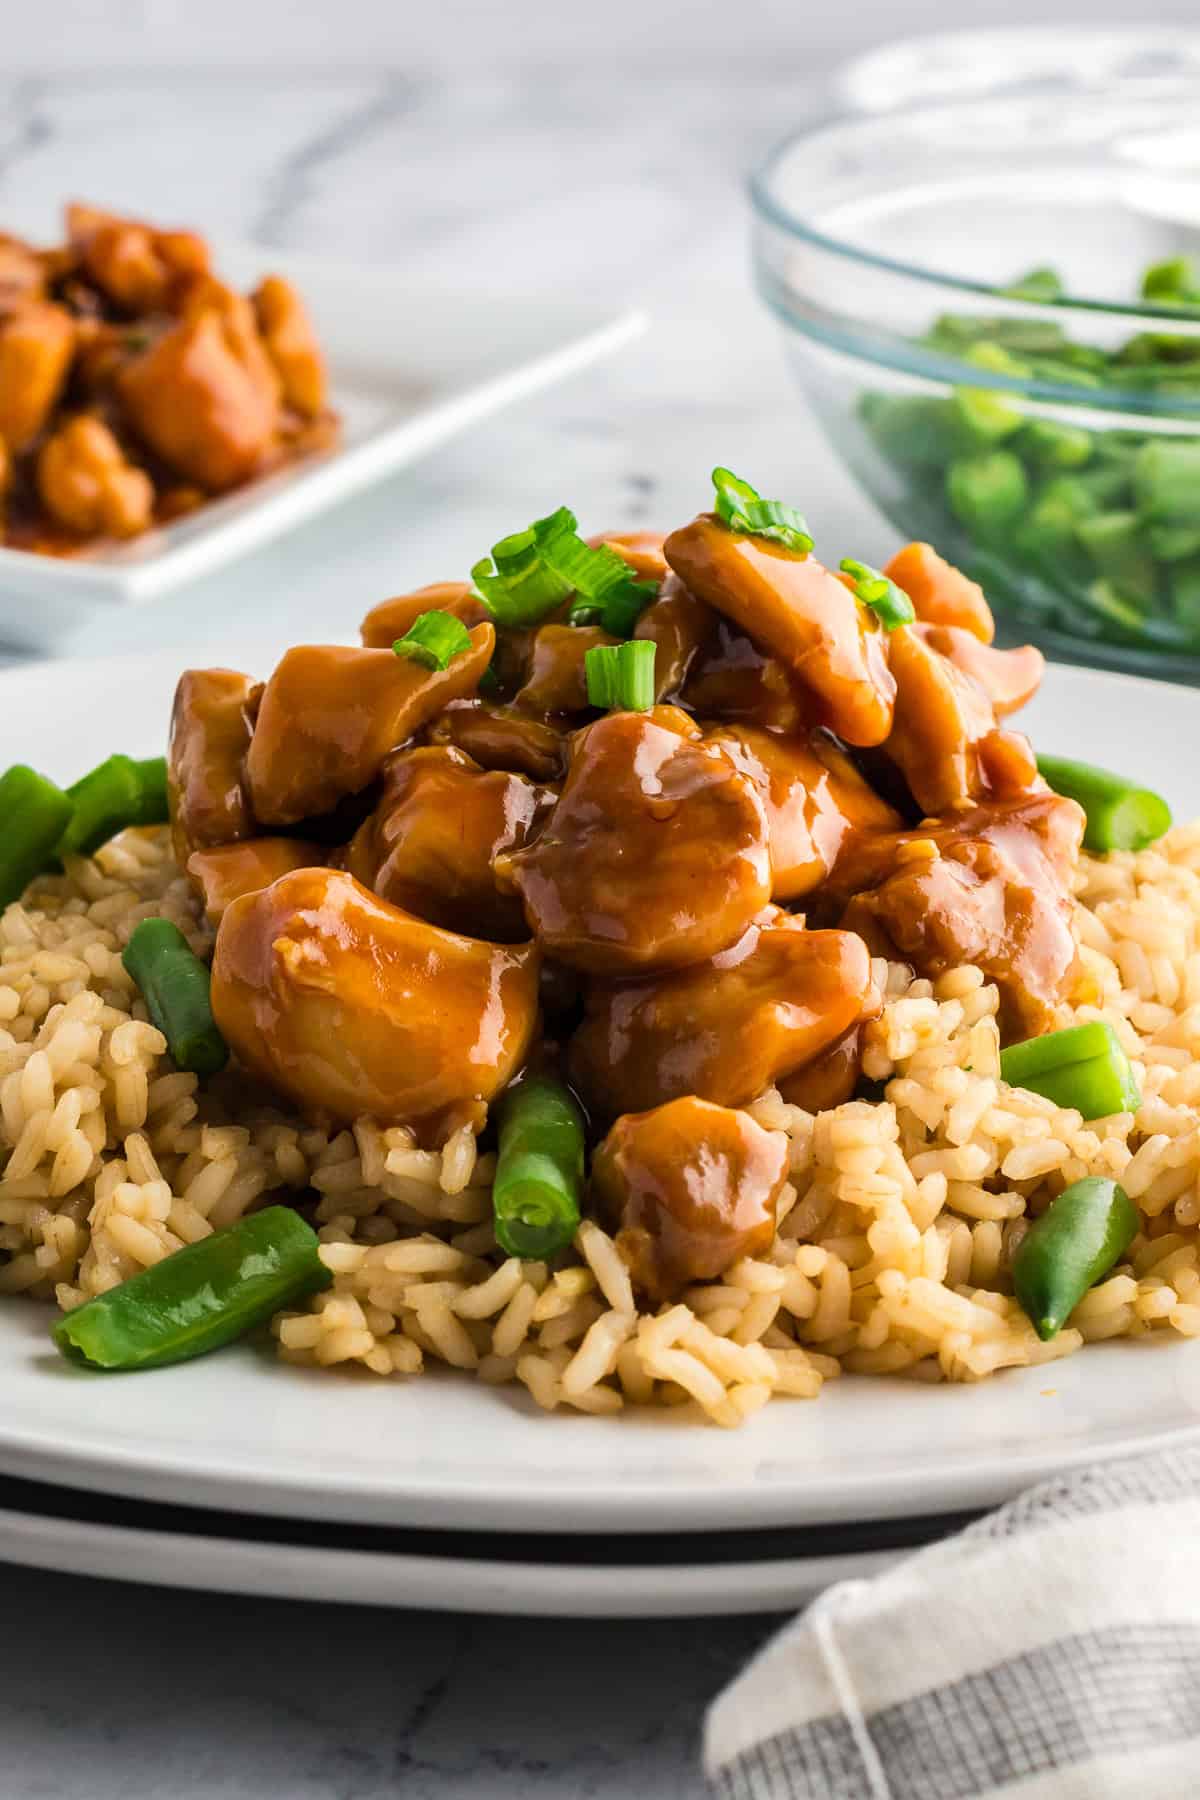 Easy homemade bourbon chicken plated over brown rice with green beans and garnished with green onions.